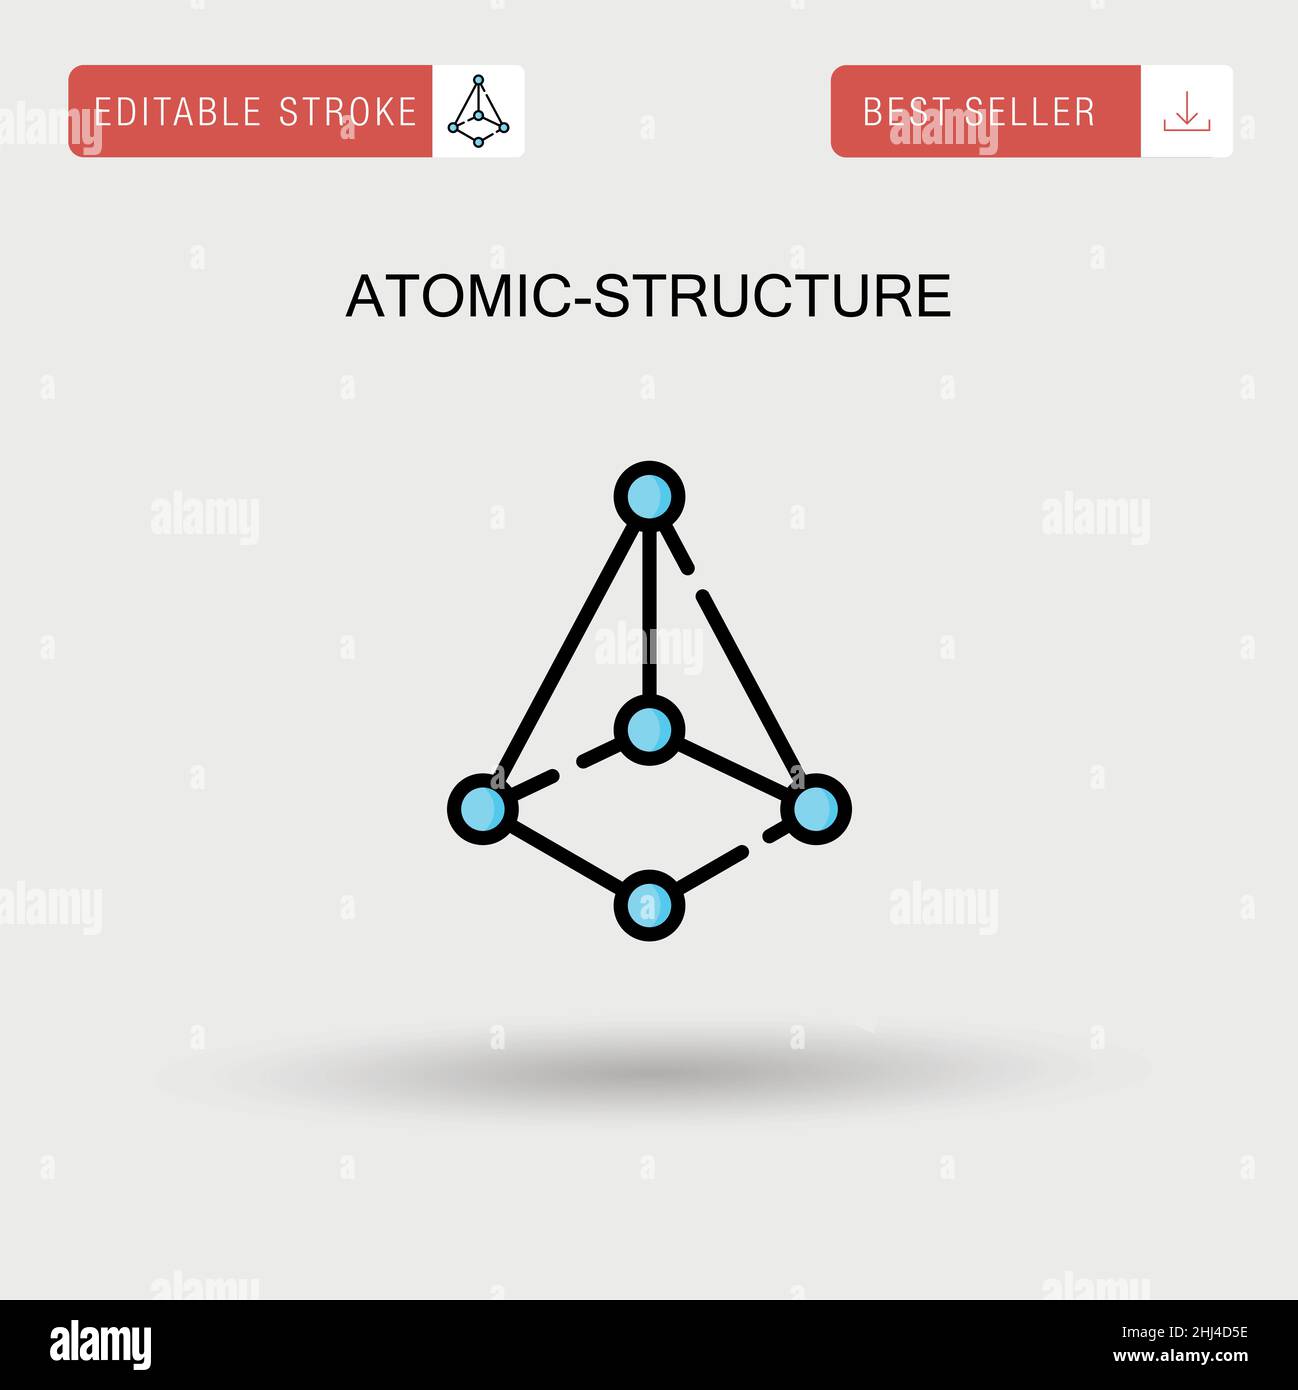 Atomic-structure Simple vector icon. Stock Vector